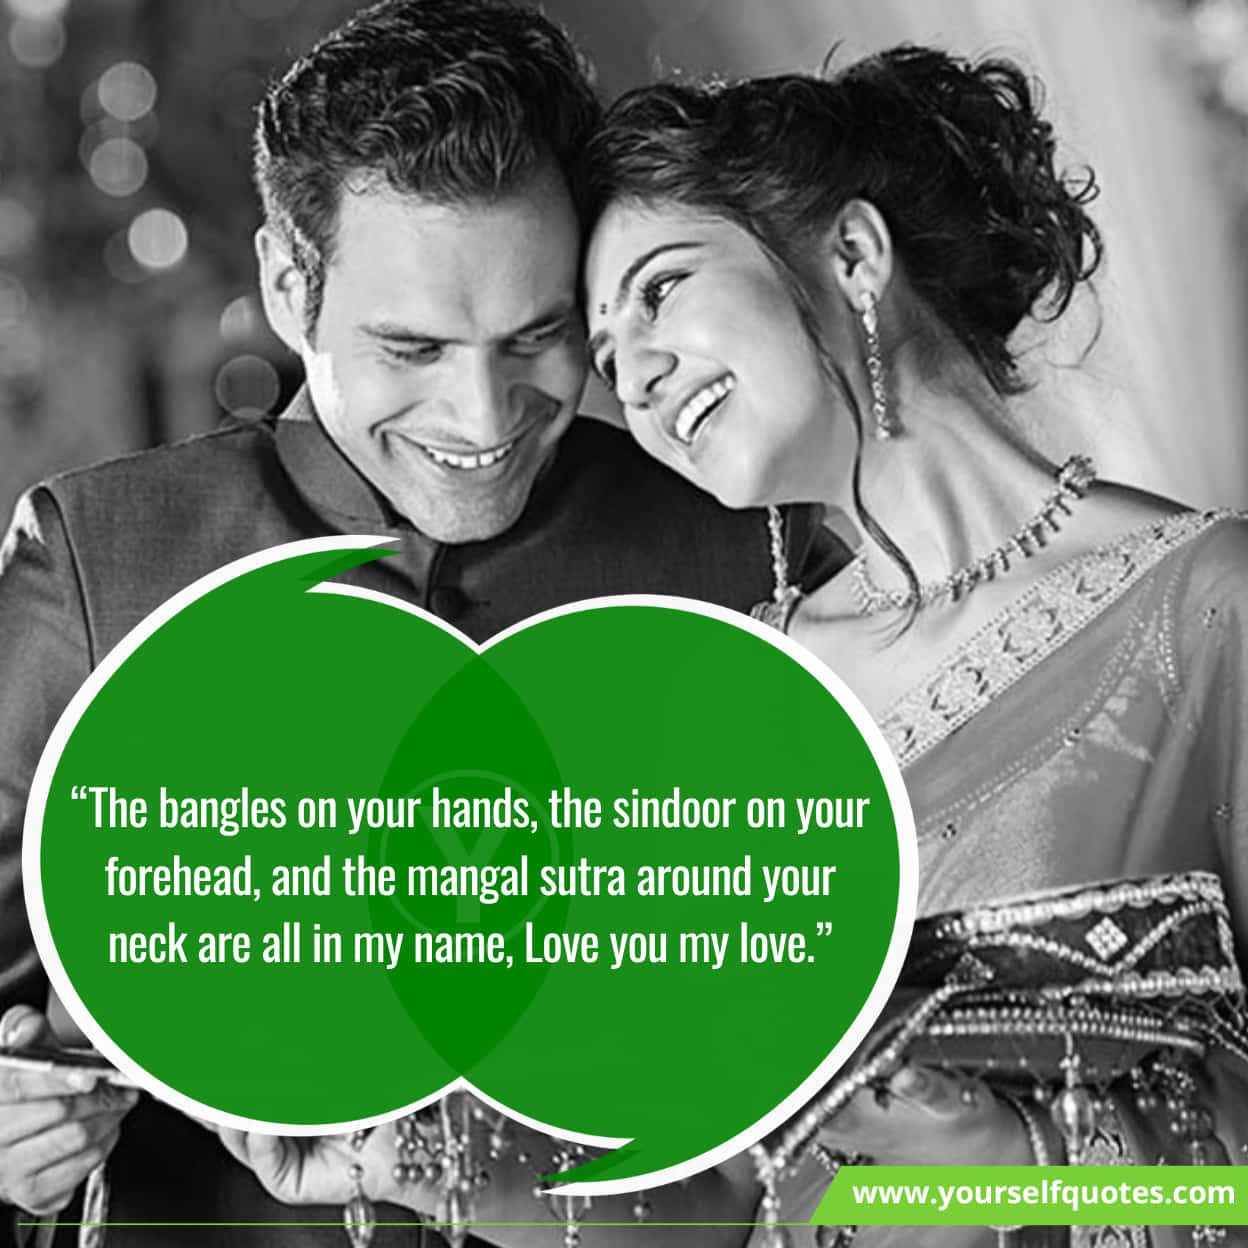 Karva Chauth Quotes for Wife